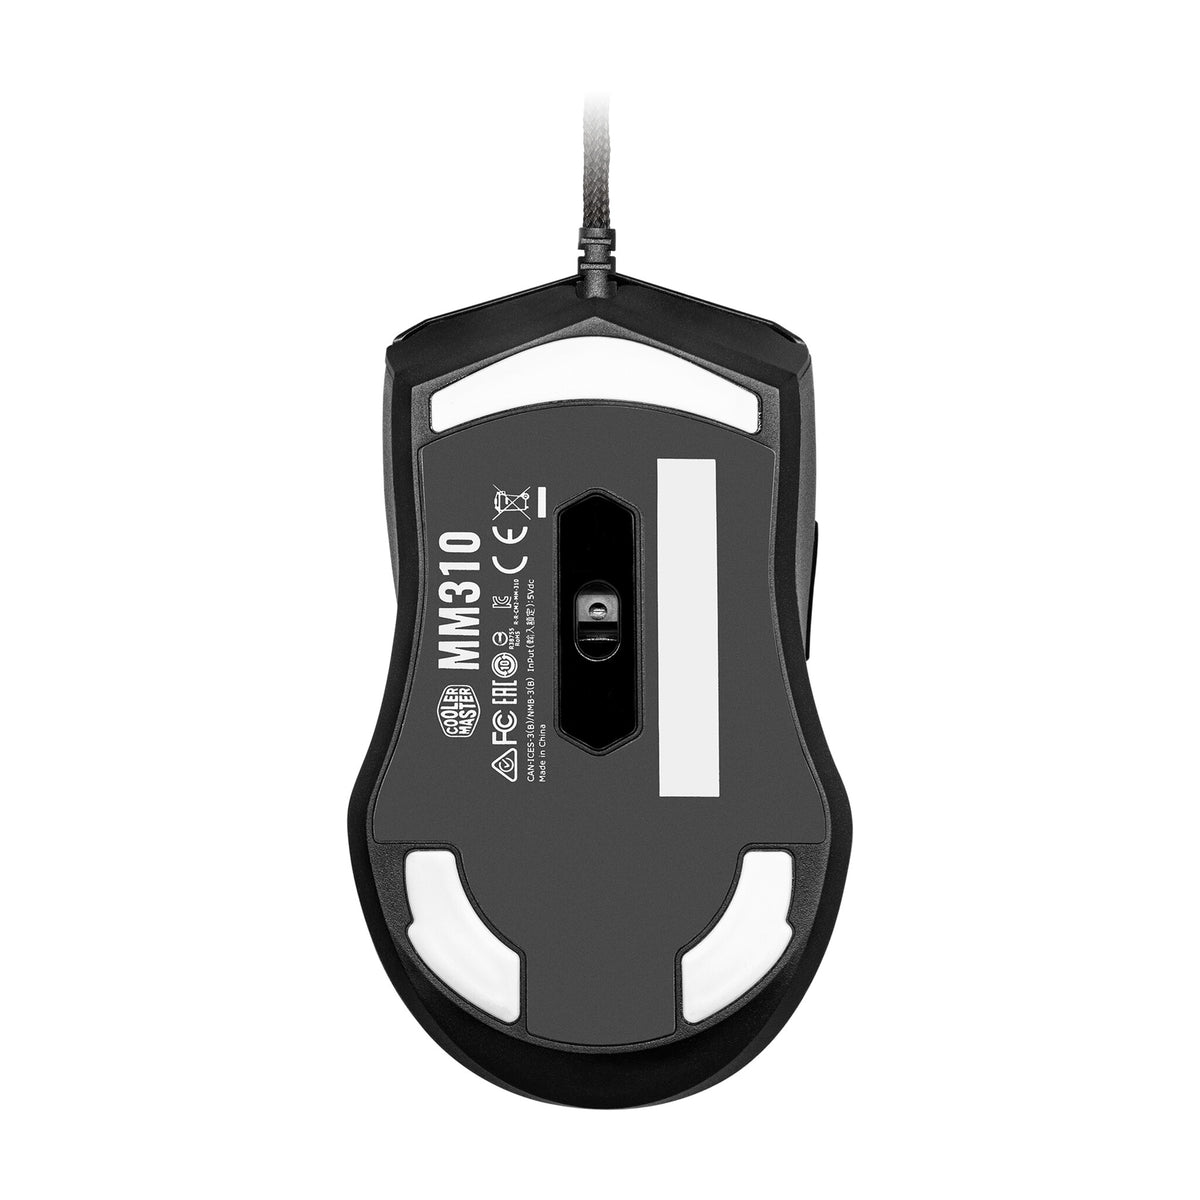 Cooler Master MM310 - USB Type-A Optical Mouse in Black - 12,000 DPI